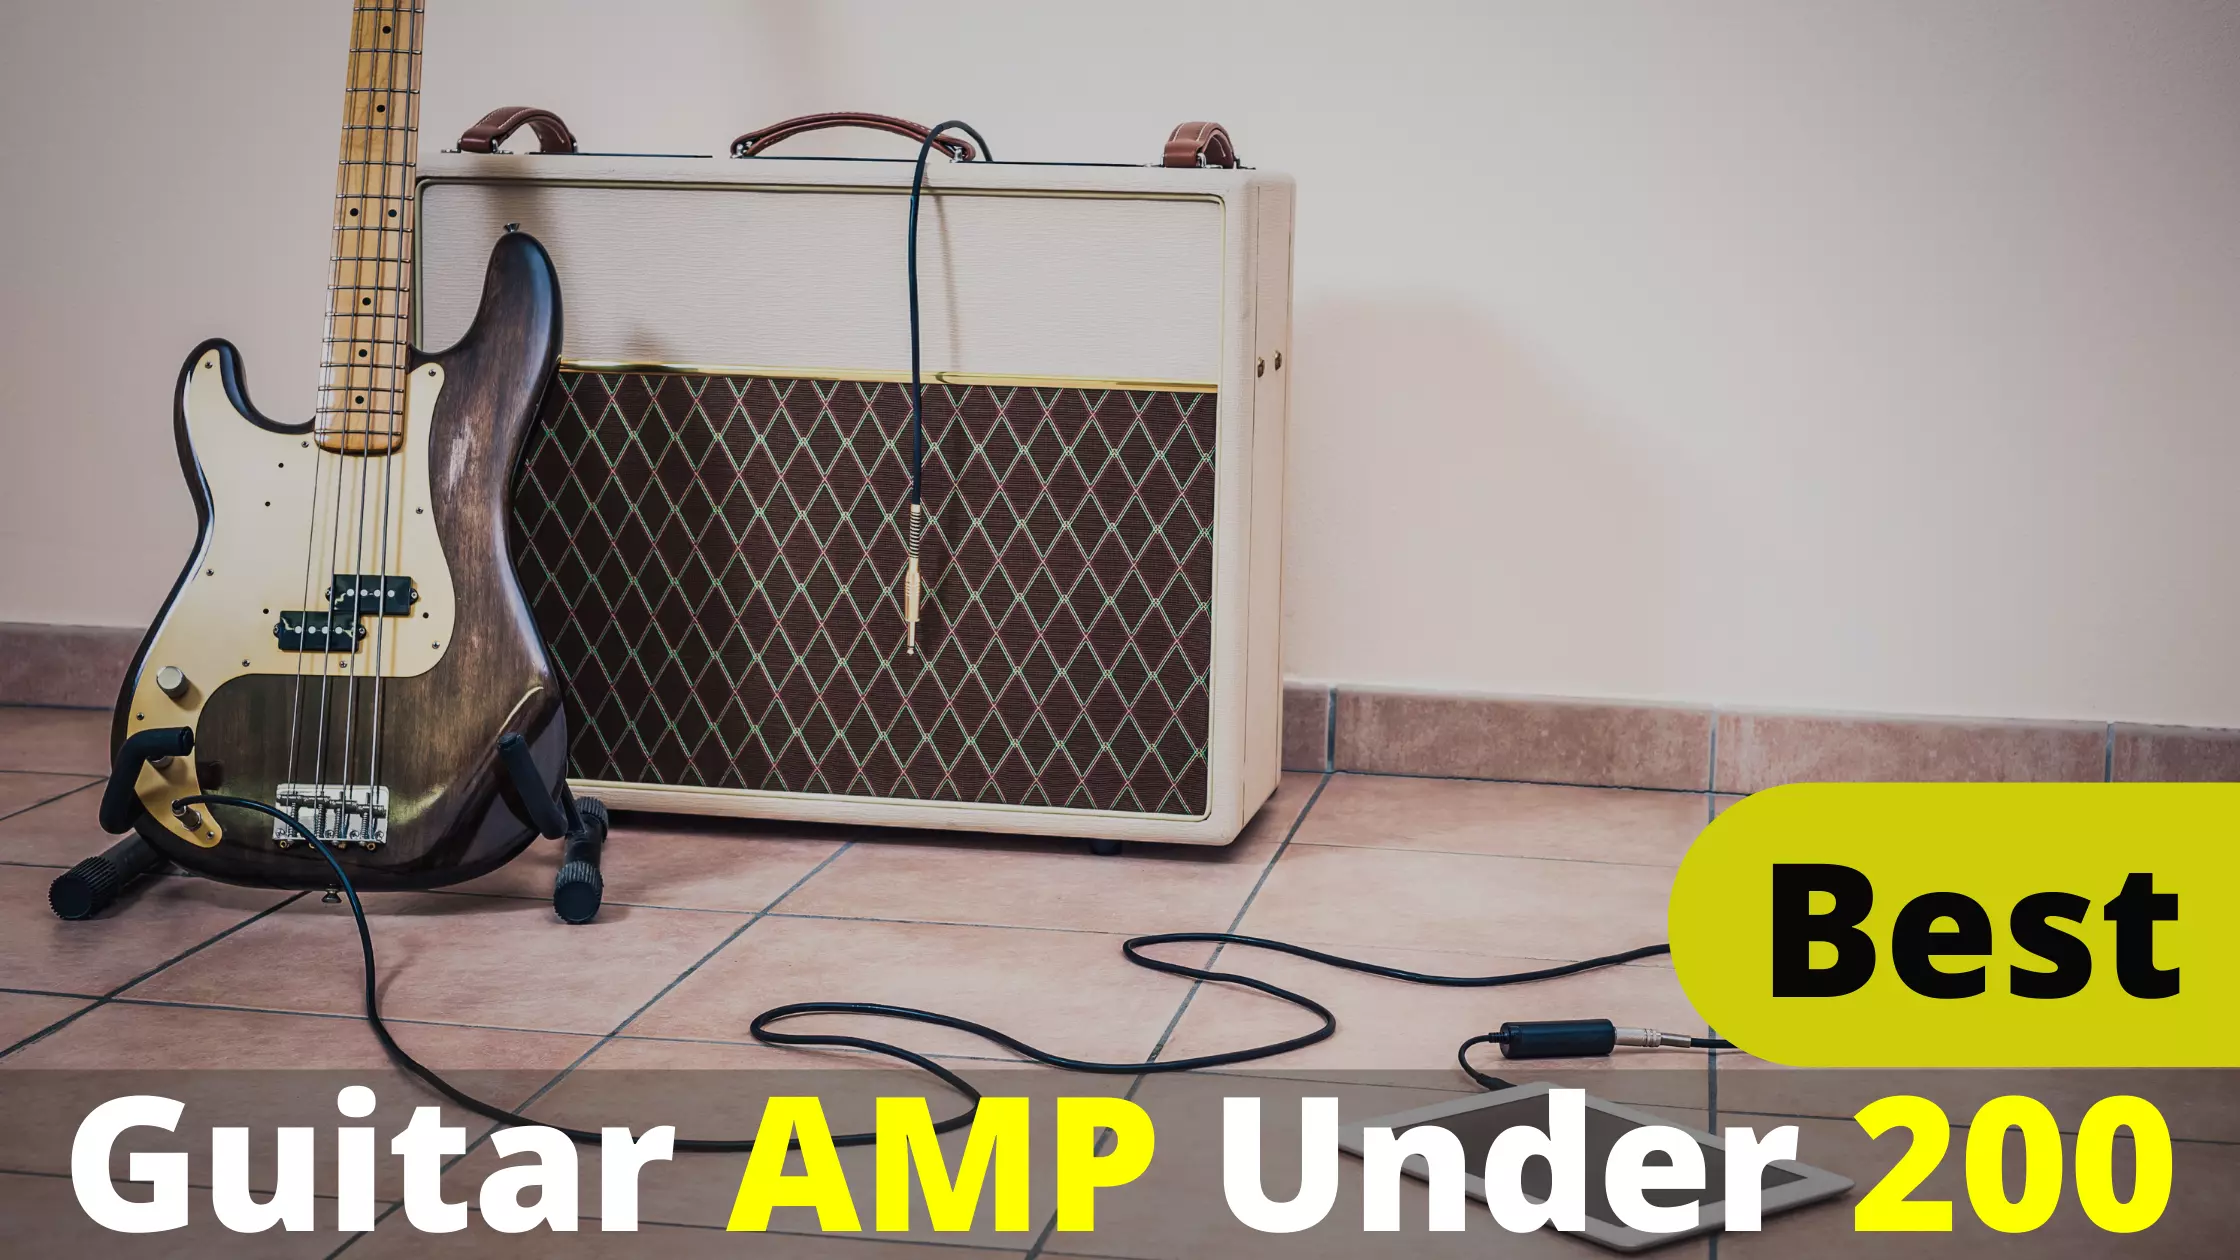 Best Guitar Amp Under 200 - Buying Guide And Reviews 2022